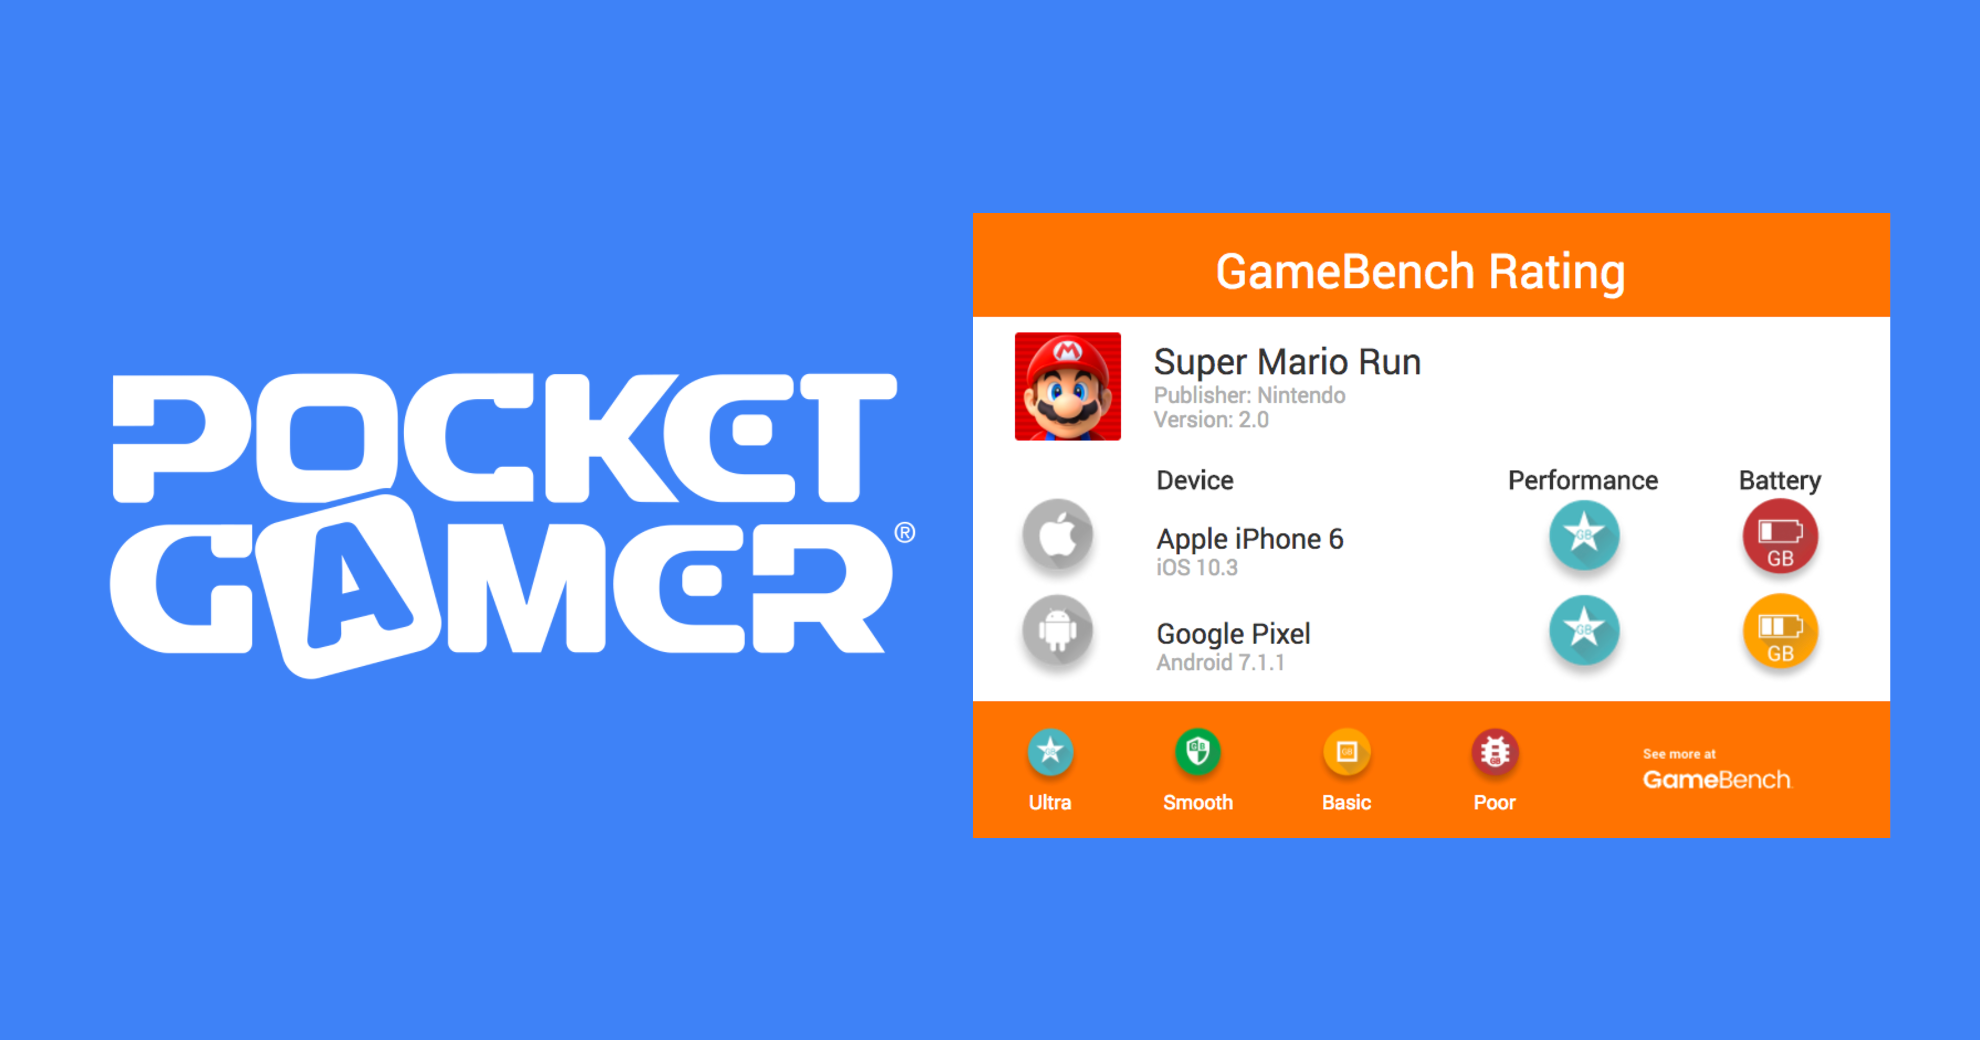 GameBench brings user-centric mobile performance ratings to Pocket Gamer